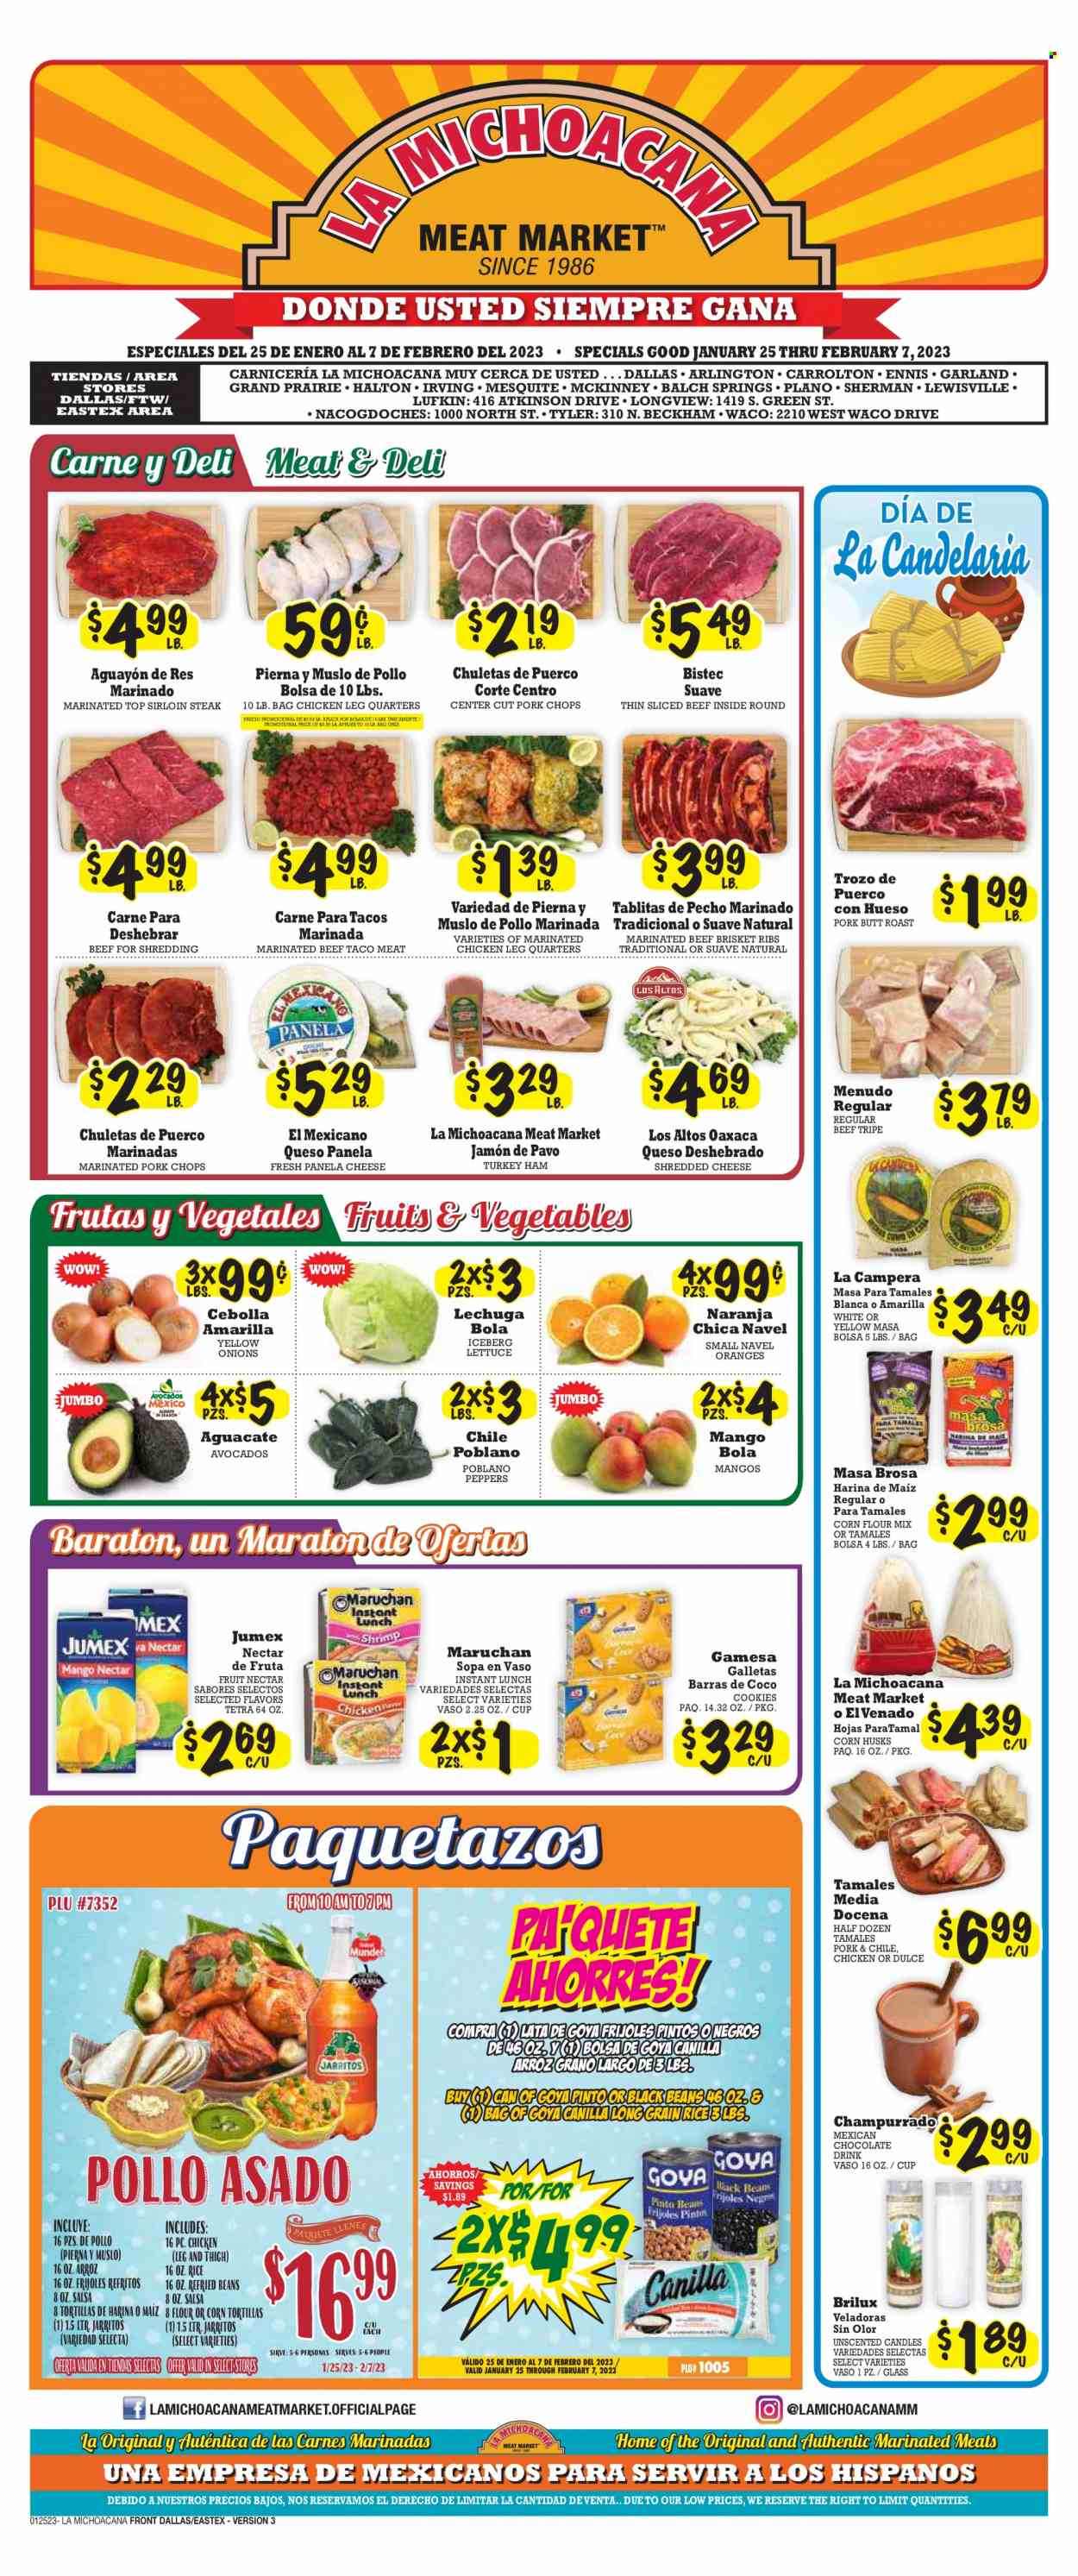 thumbnail - La Michoacana Meat Market Flyer - 01/25/2023 - 02/07/2023 - Sales products - corn tortillas, tortillas, lettuce, peppers, avocado, oranges, ham, shredded cheese, Panela cheese, cookies, chocolate, corn flour, black beans, refried beans, Goya, rice, long grain rice, salsa, fruit nectar, chocolate drink, chicken legs, marinated chicken, beef meat, beef sirloin, beef tripe, steak, sirloin steak, beef brisket, marinated beef, ribs, pork chops, pork meat, marinated pork, Suave, cup, candle, navel oranges. Page 1.